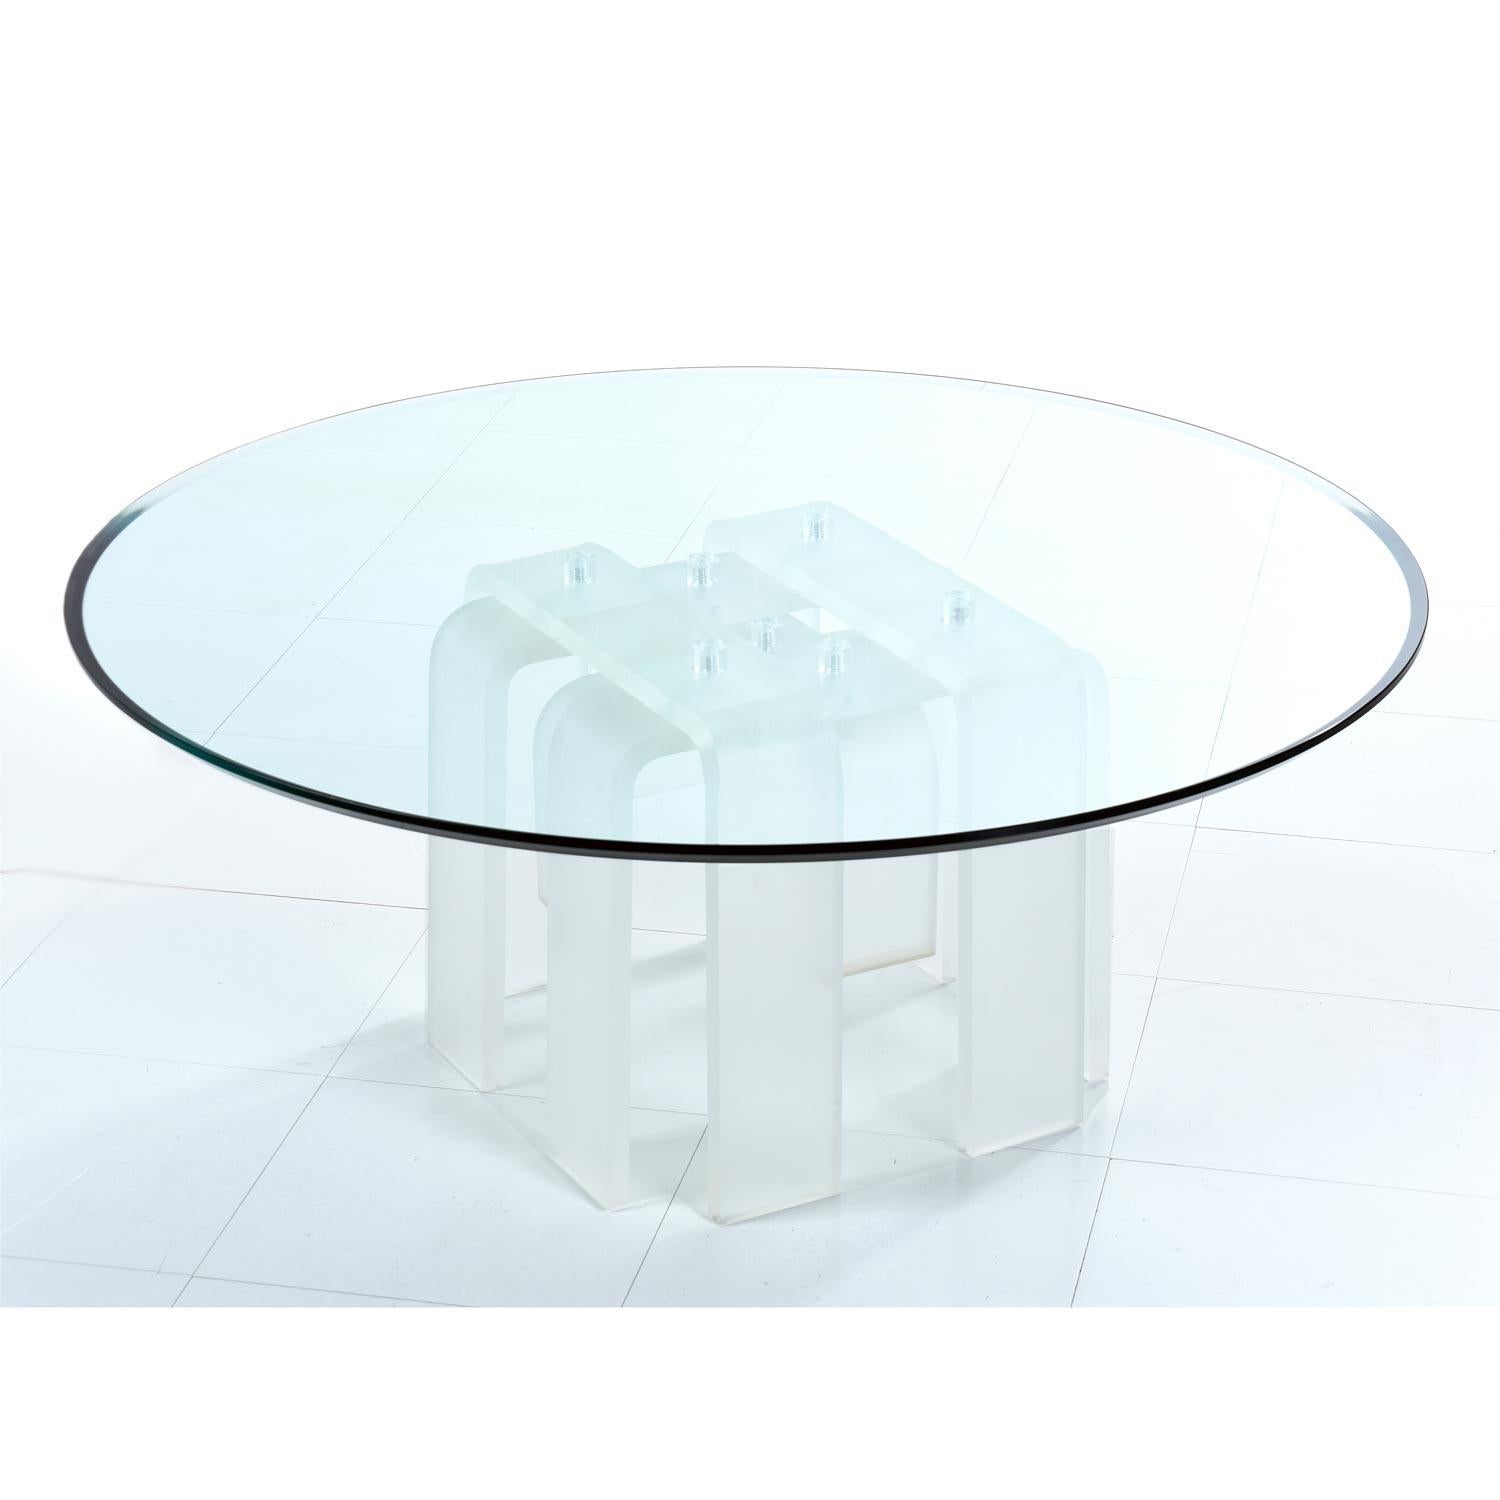 The arched legs of this 1970s frosted Lucite base evoke the beauty and serenity of a cascading waterfall. The glass top appears top float within the ethereal, translucent acrylic legs. Massive 1/2